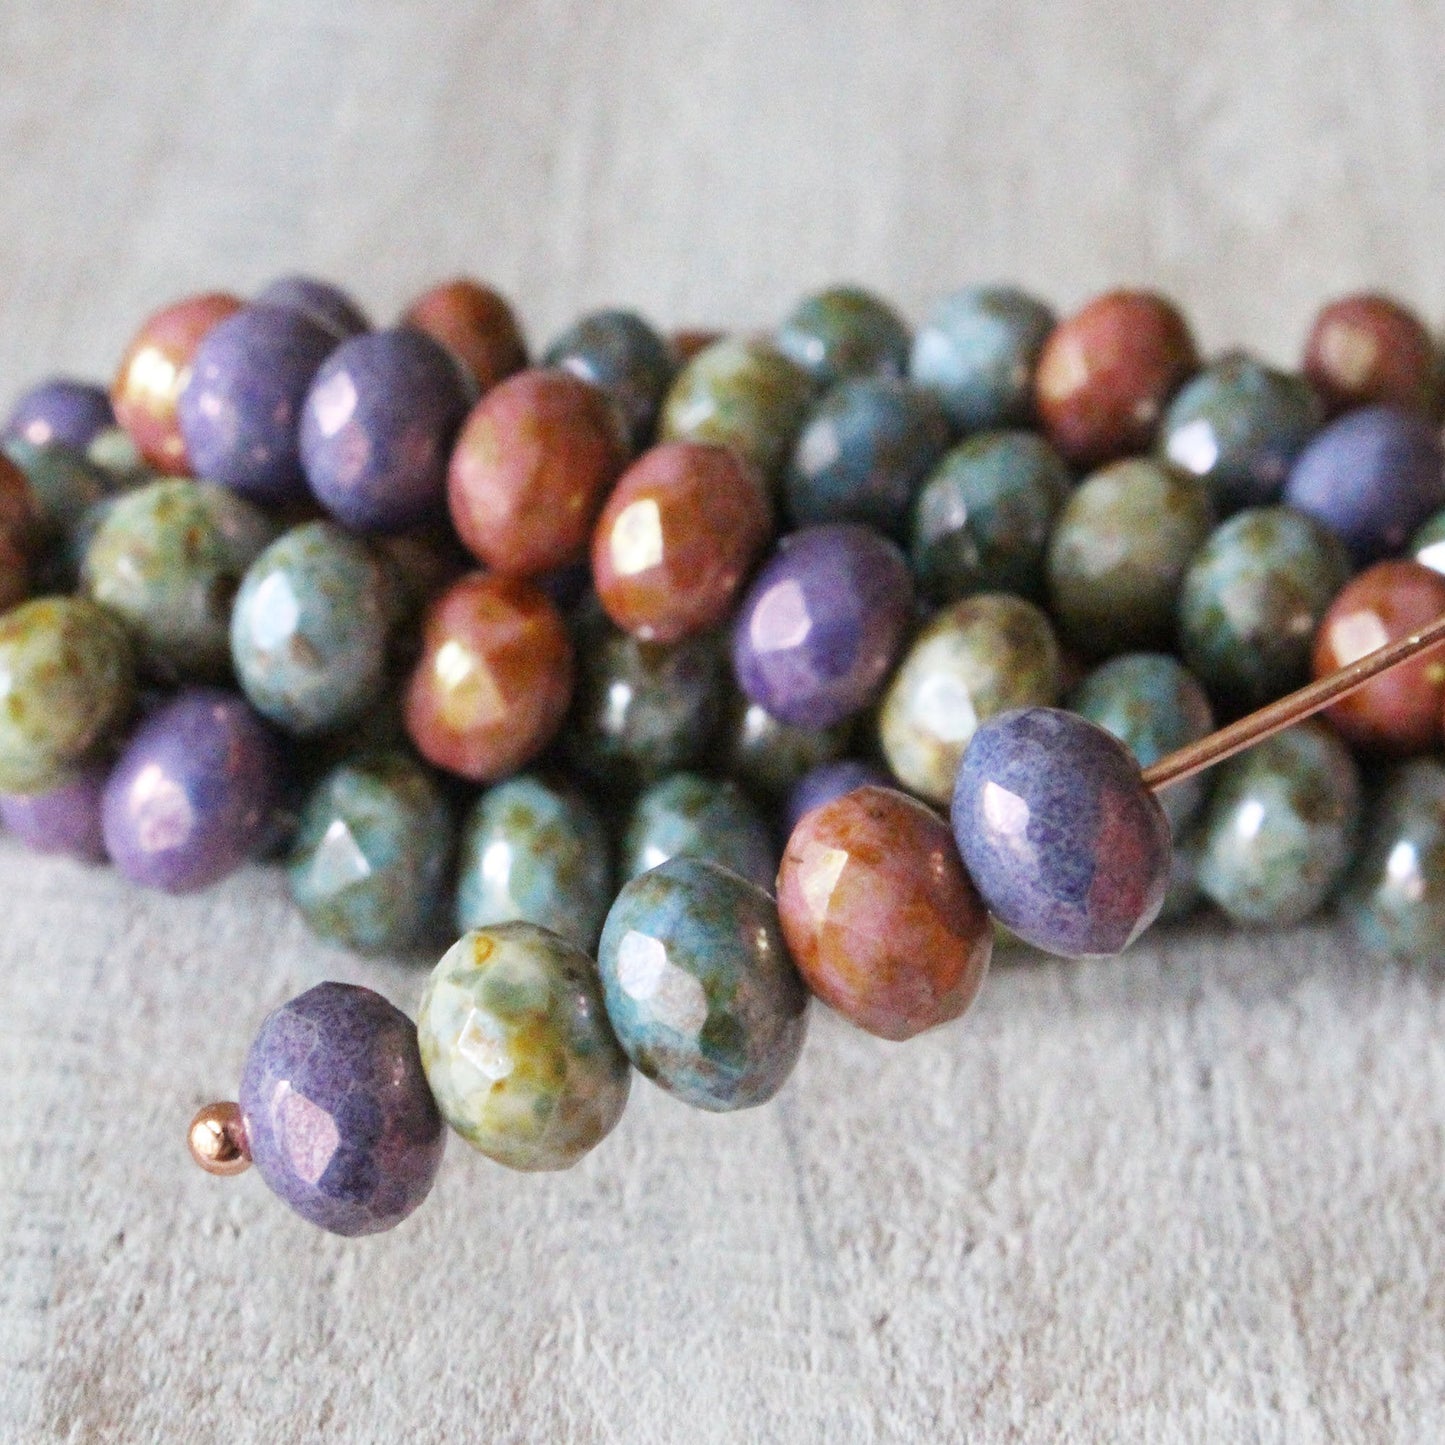 5x7mm Rondelle Beads - Grape, Apricot, Stone and Sage Picasso Mix - 25 Beads